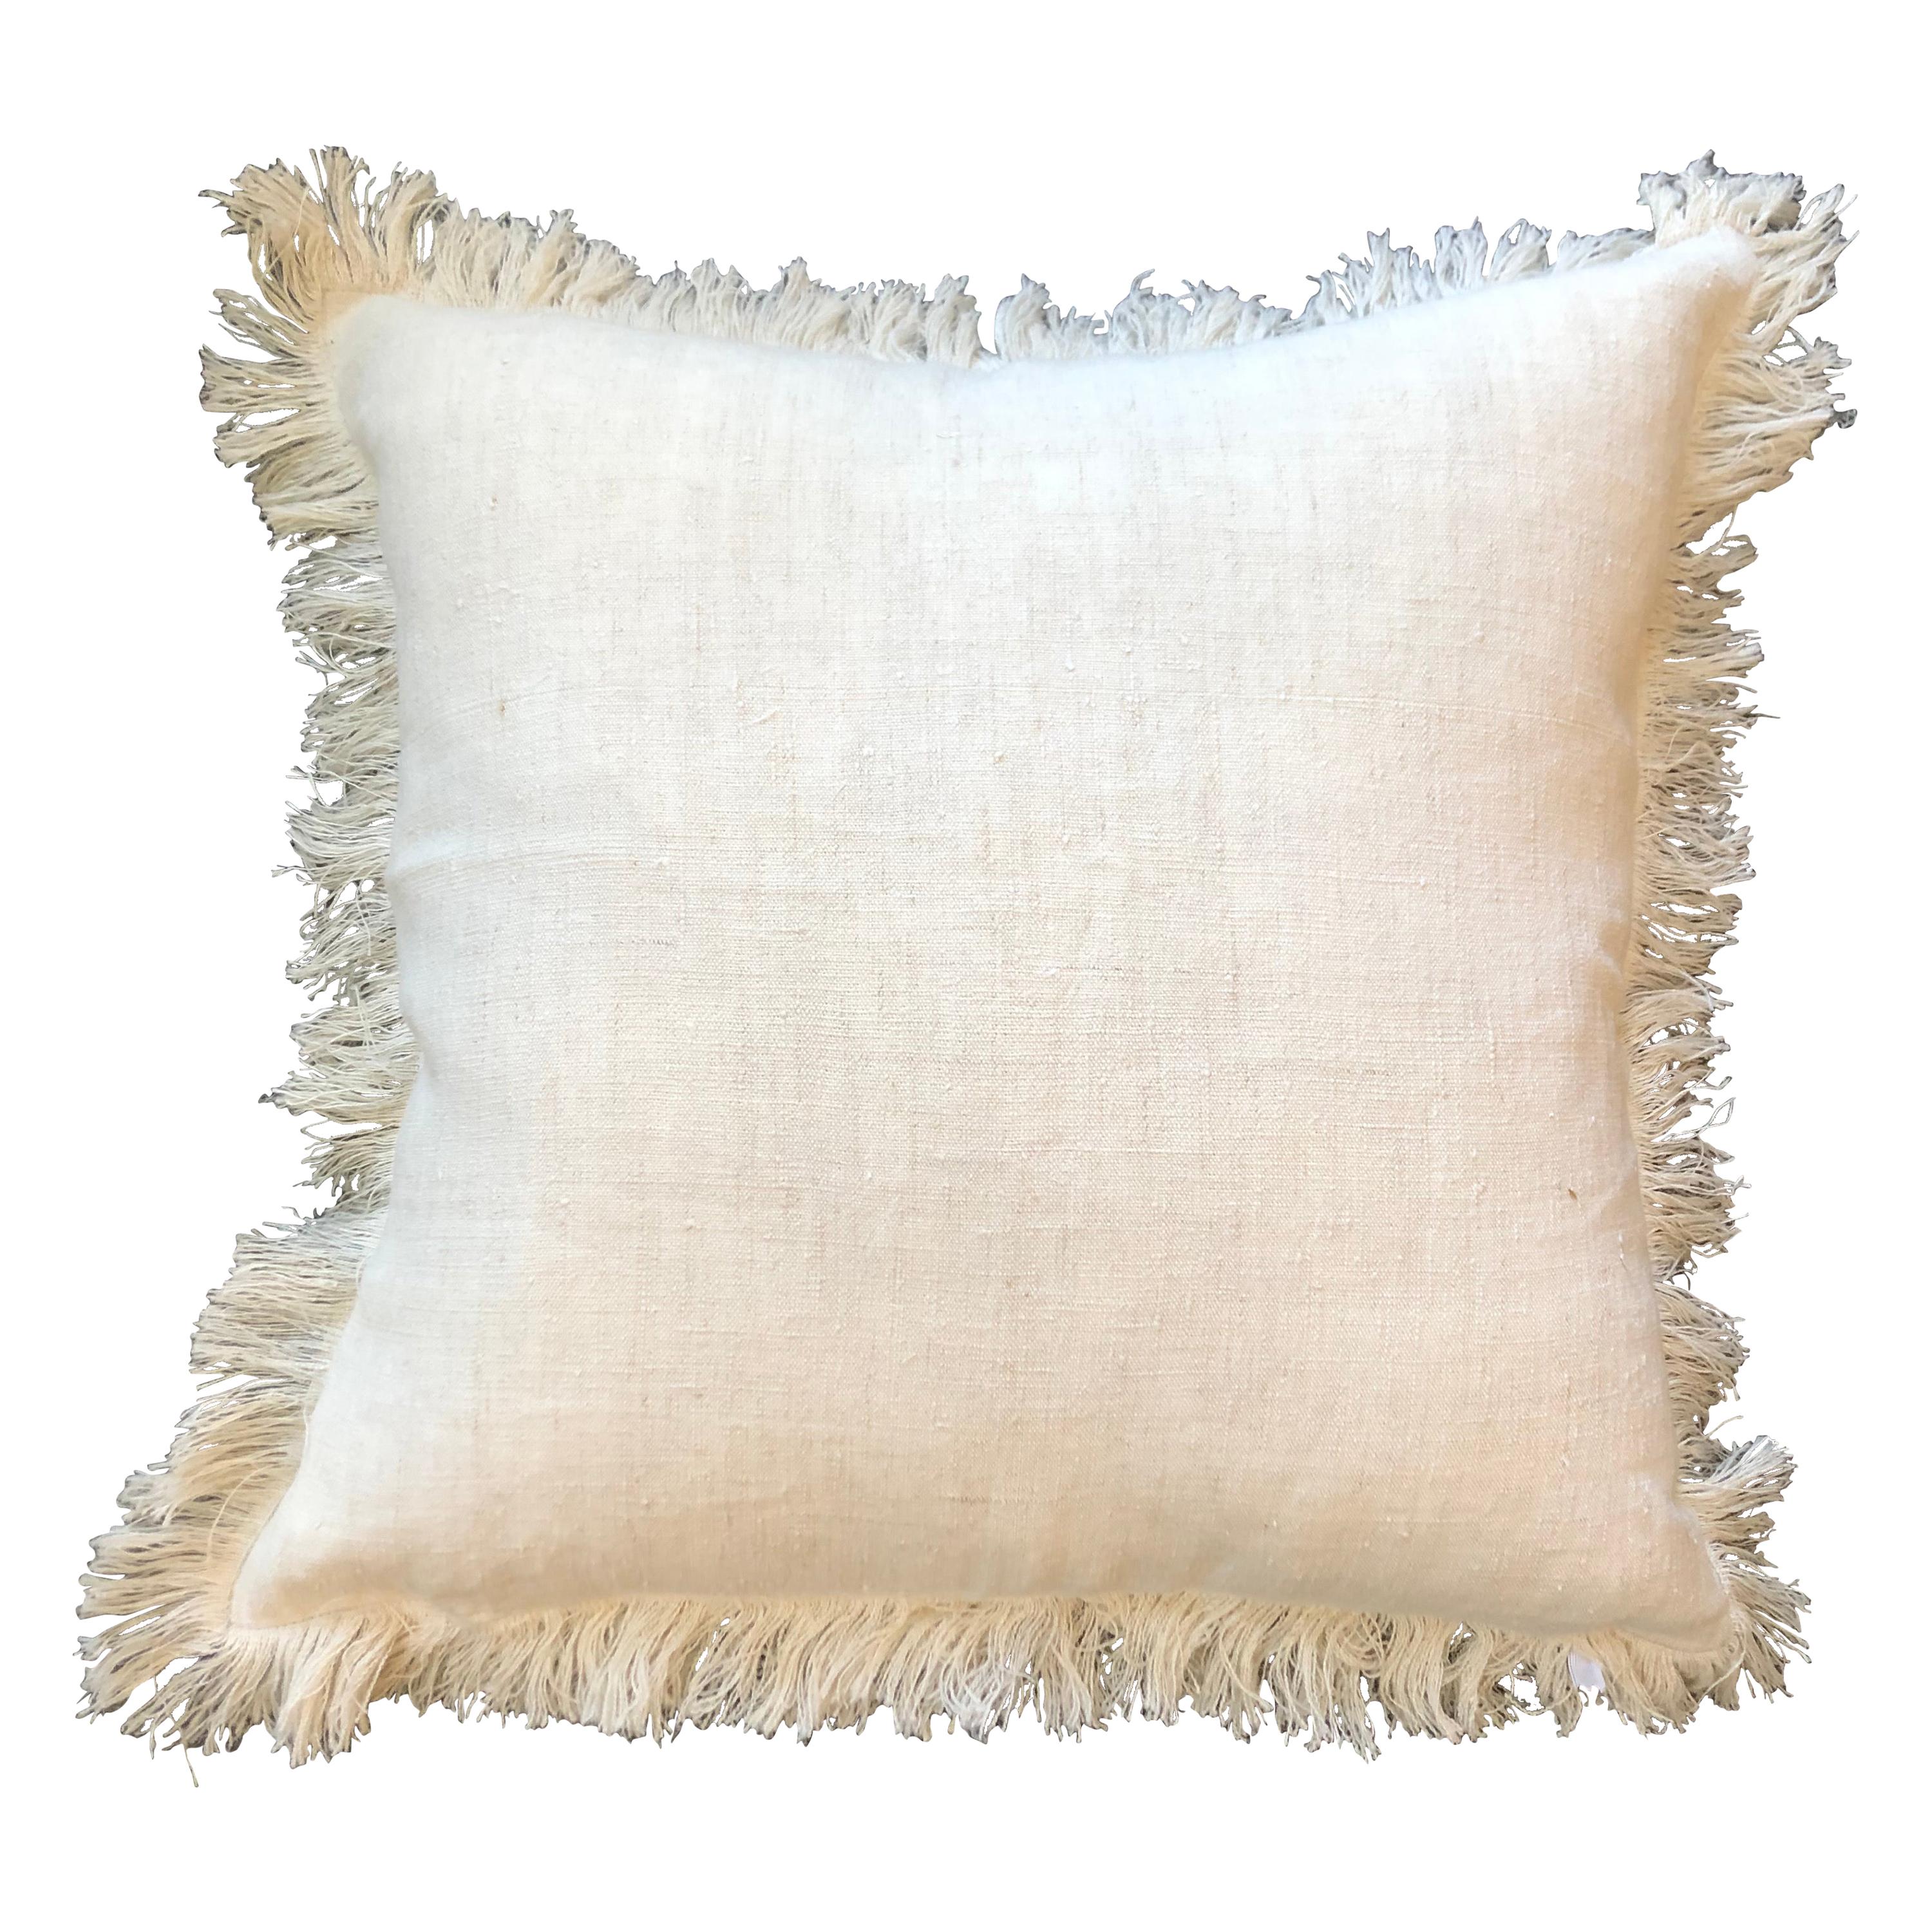 "Palermo" Handmade Linen/Cotton Pillow by Le Lampade For Sale